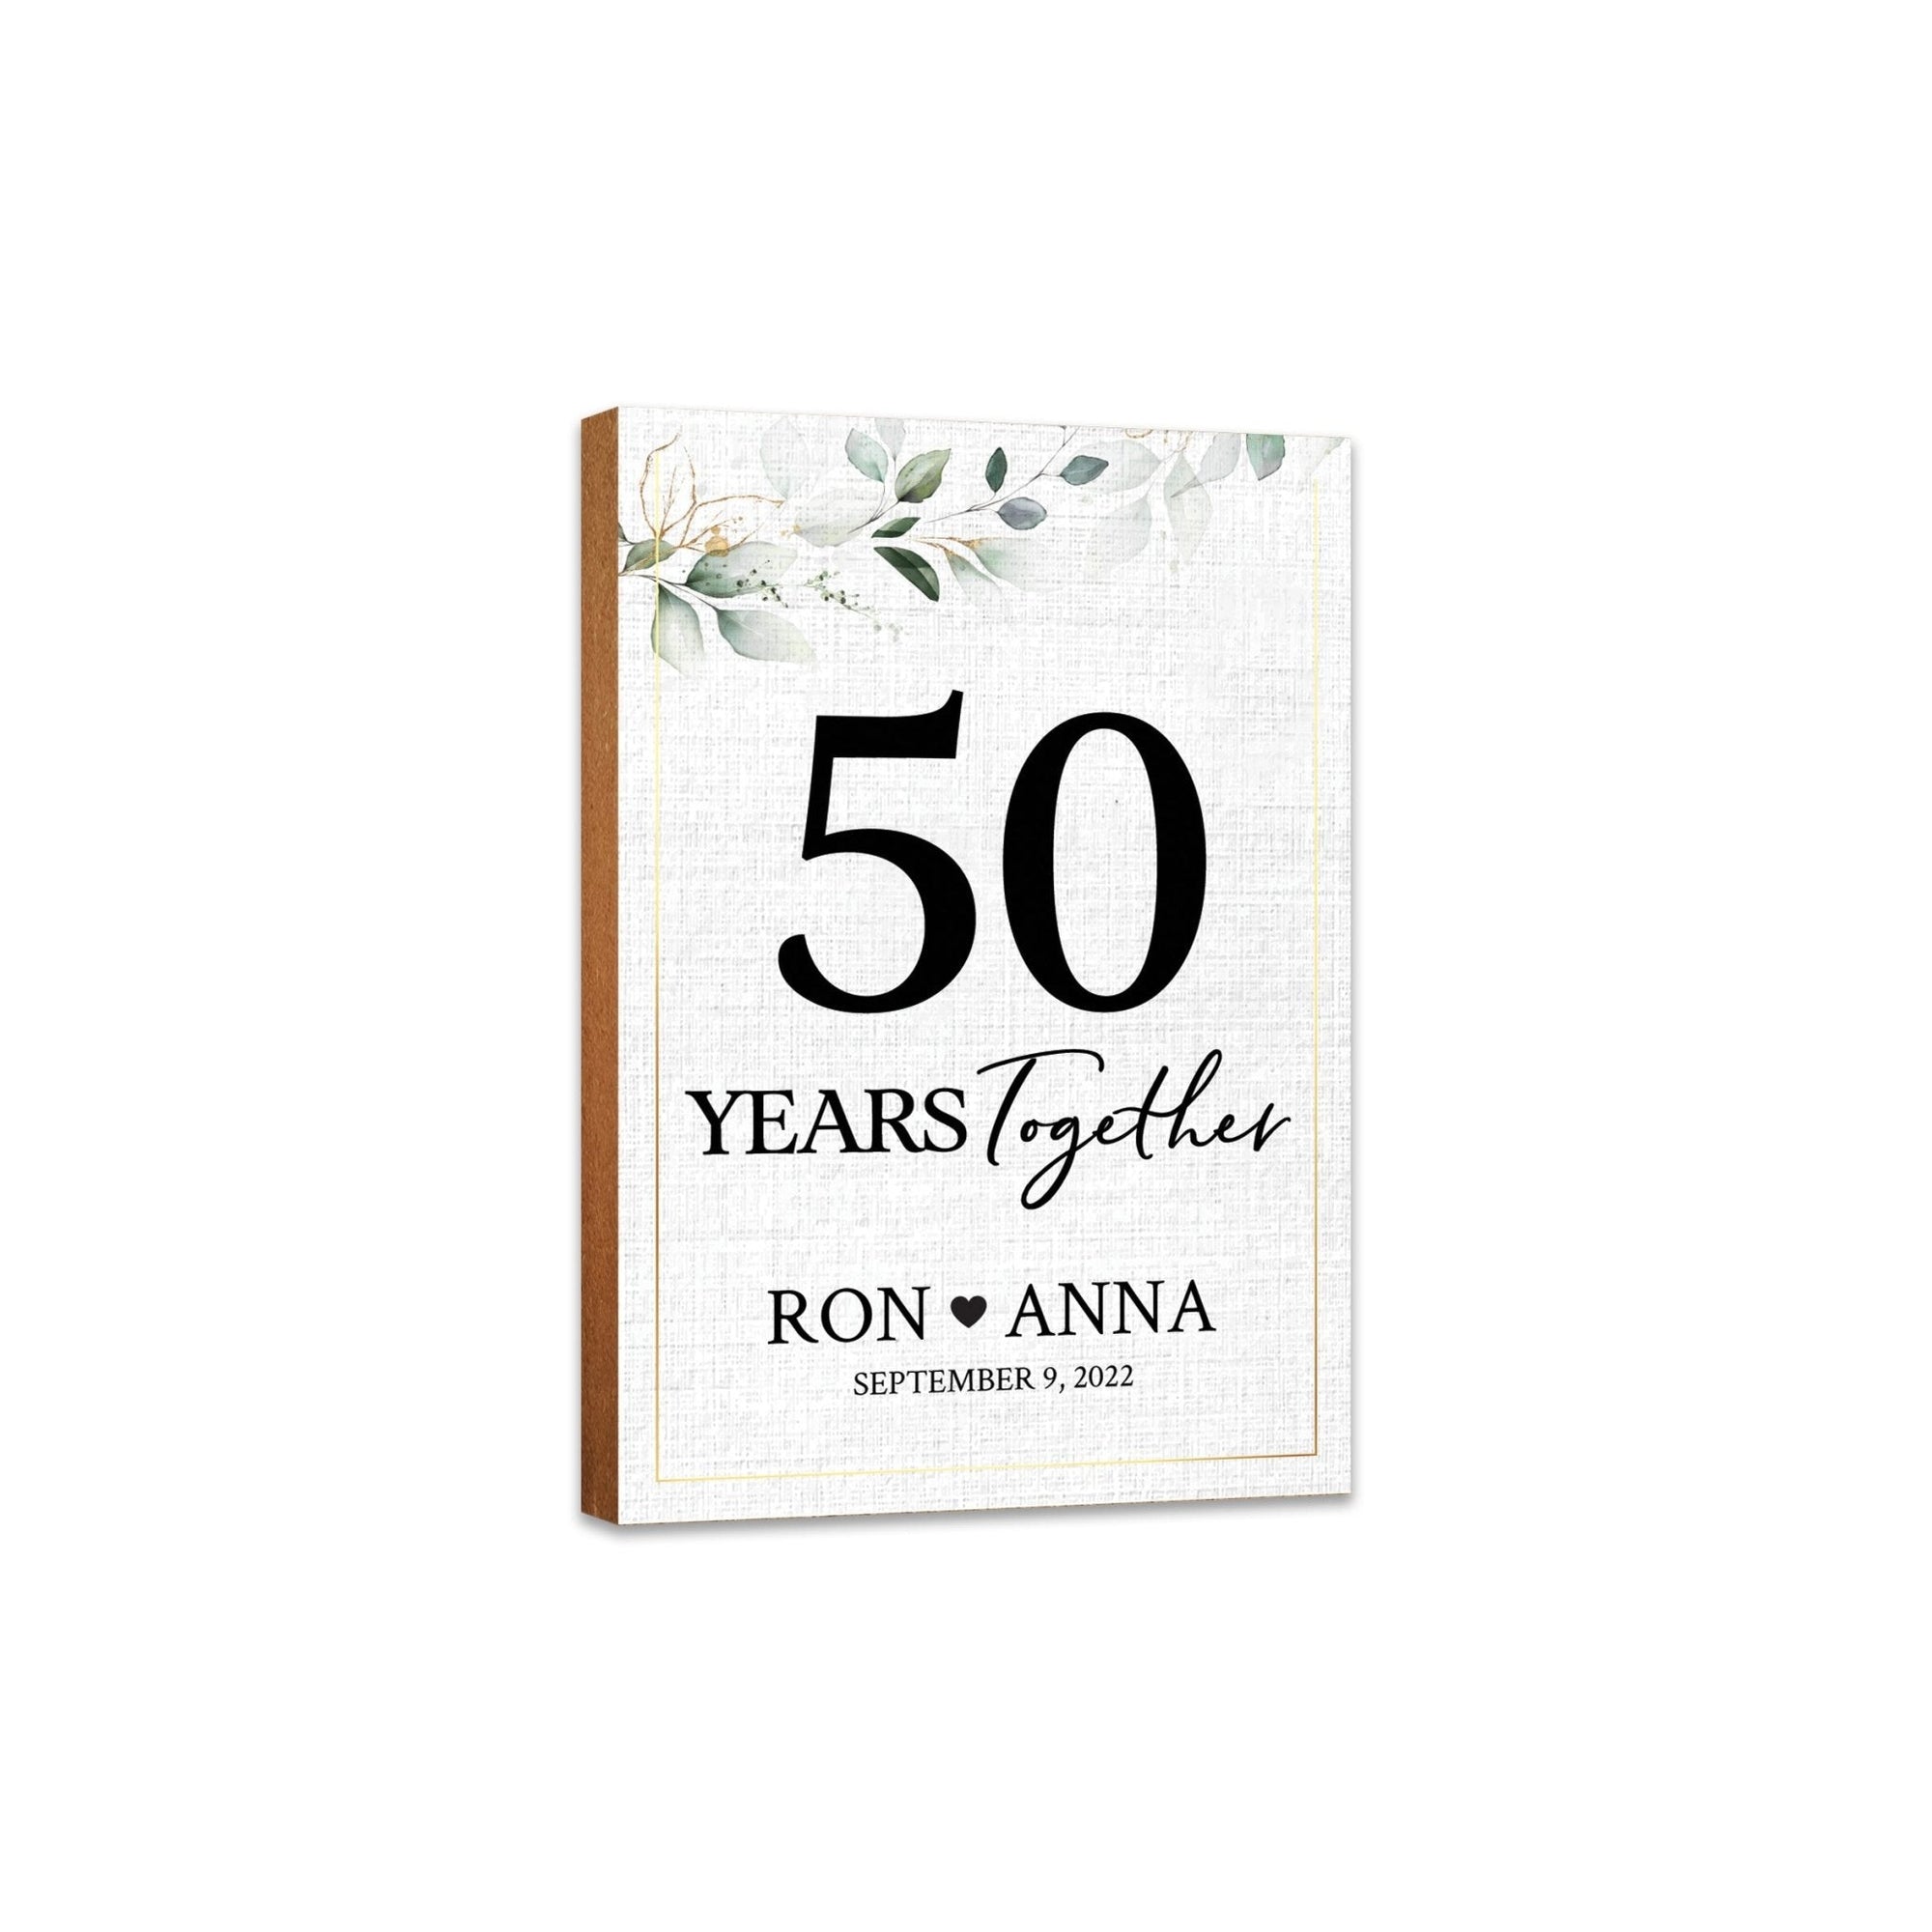 Personalized Unique Shelf Décor and Tabletop Signs Gifts for 50th Wedding Anniversary - LifeSong Milestones